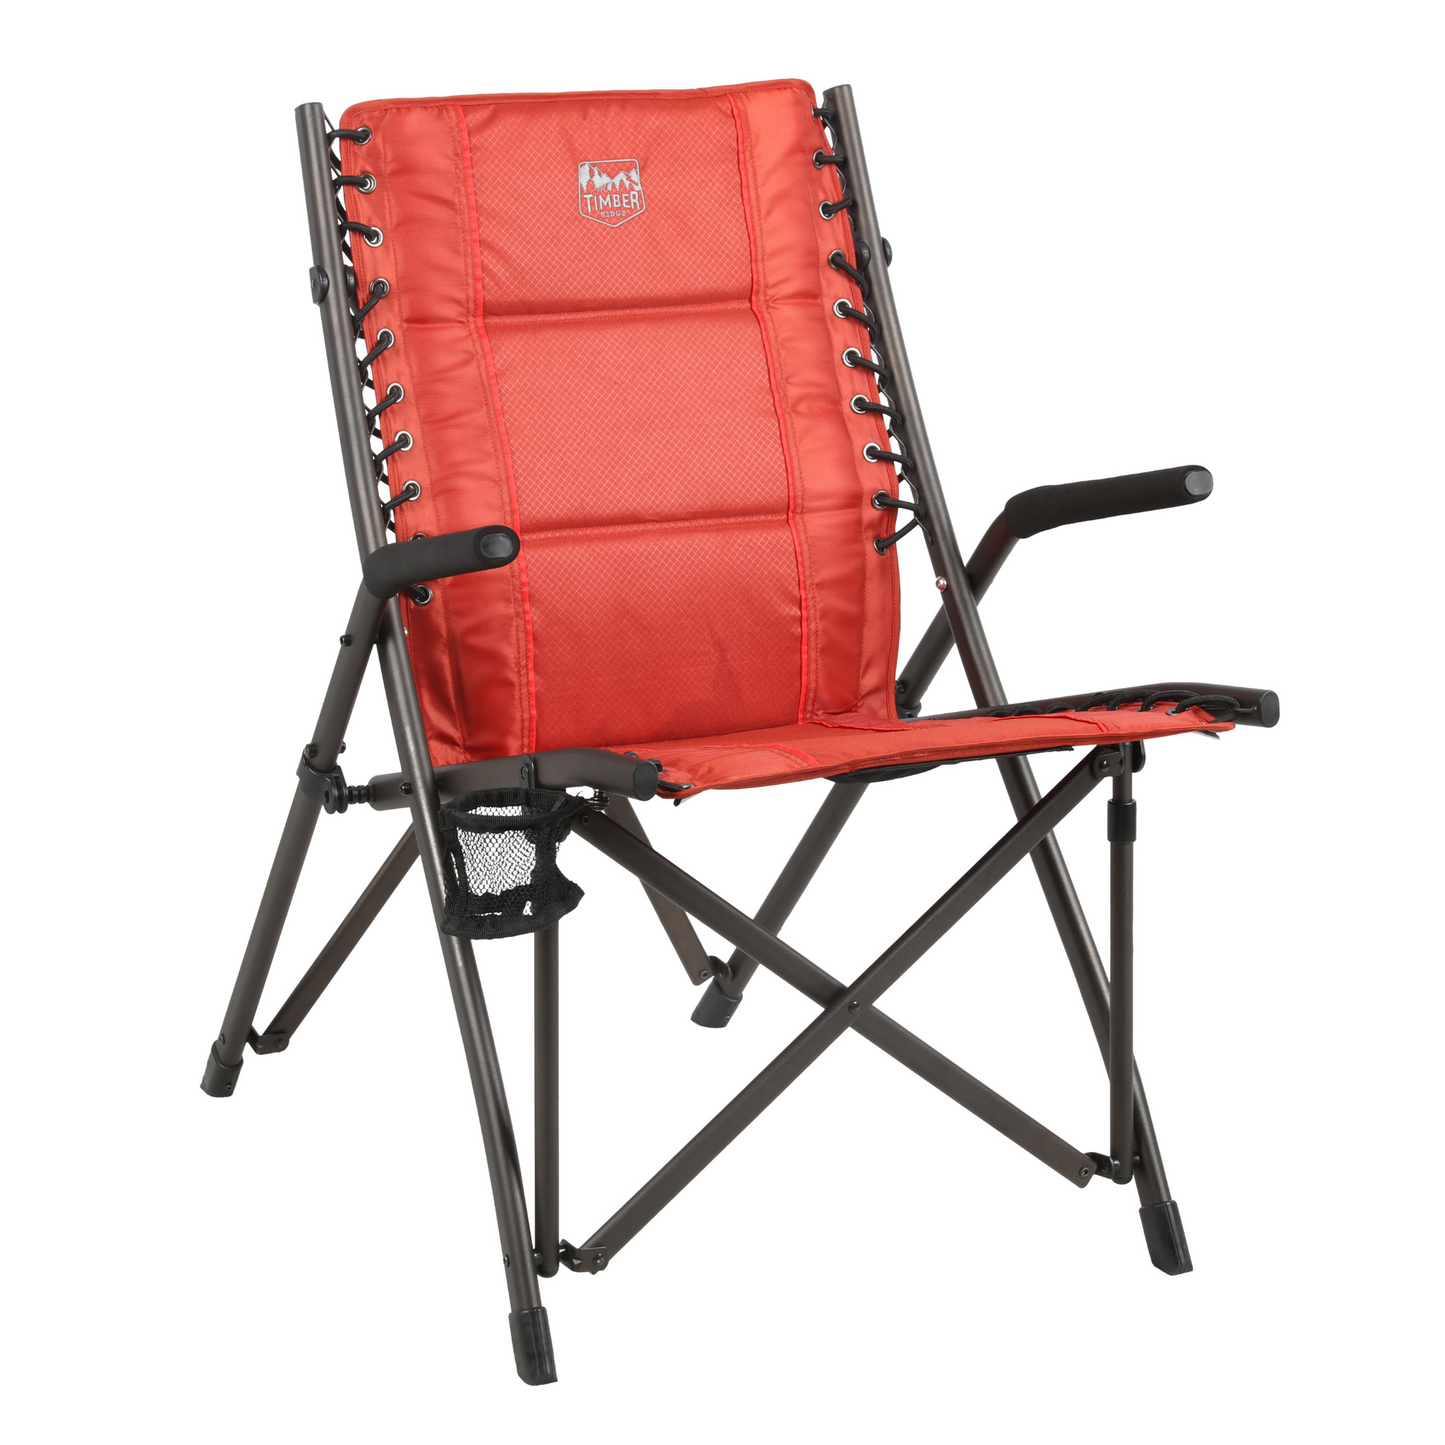 Timber Ridge® Fraser Deluxe Bungee Chair, Red